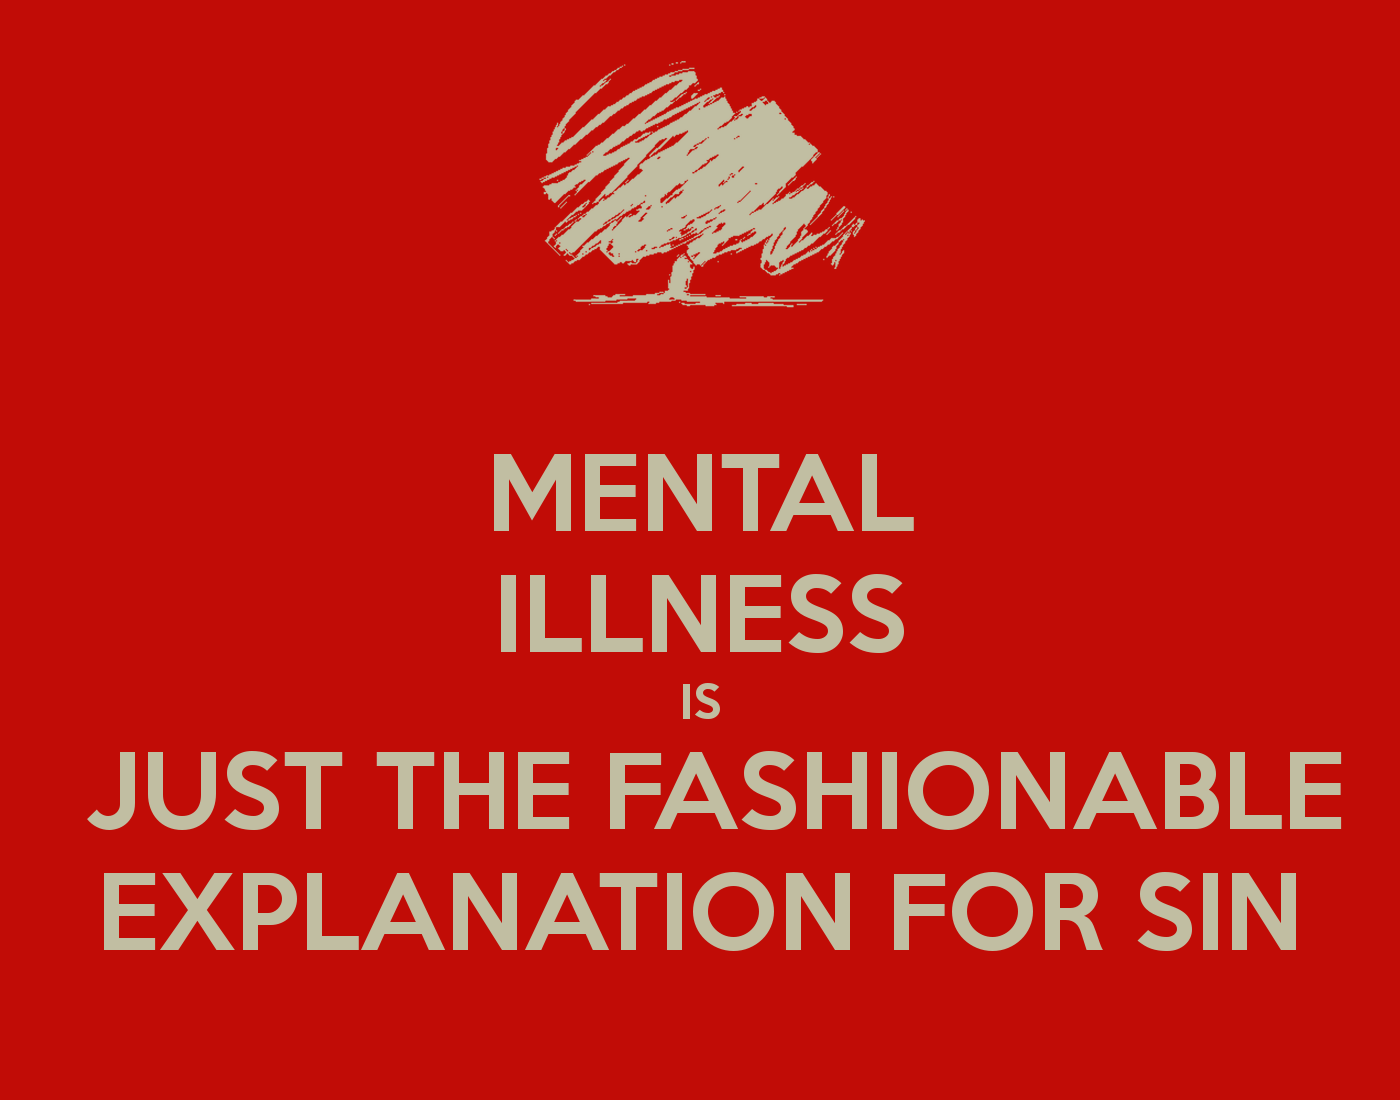 mental-illness-is-just-the-fashionable-explanation-for-sin